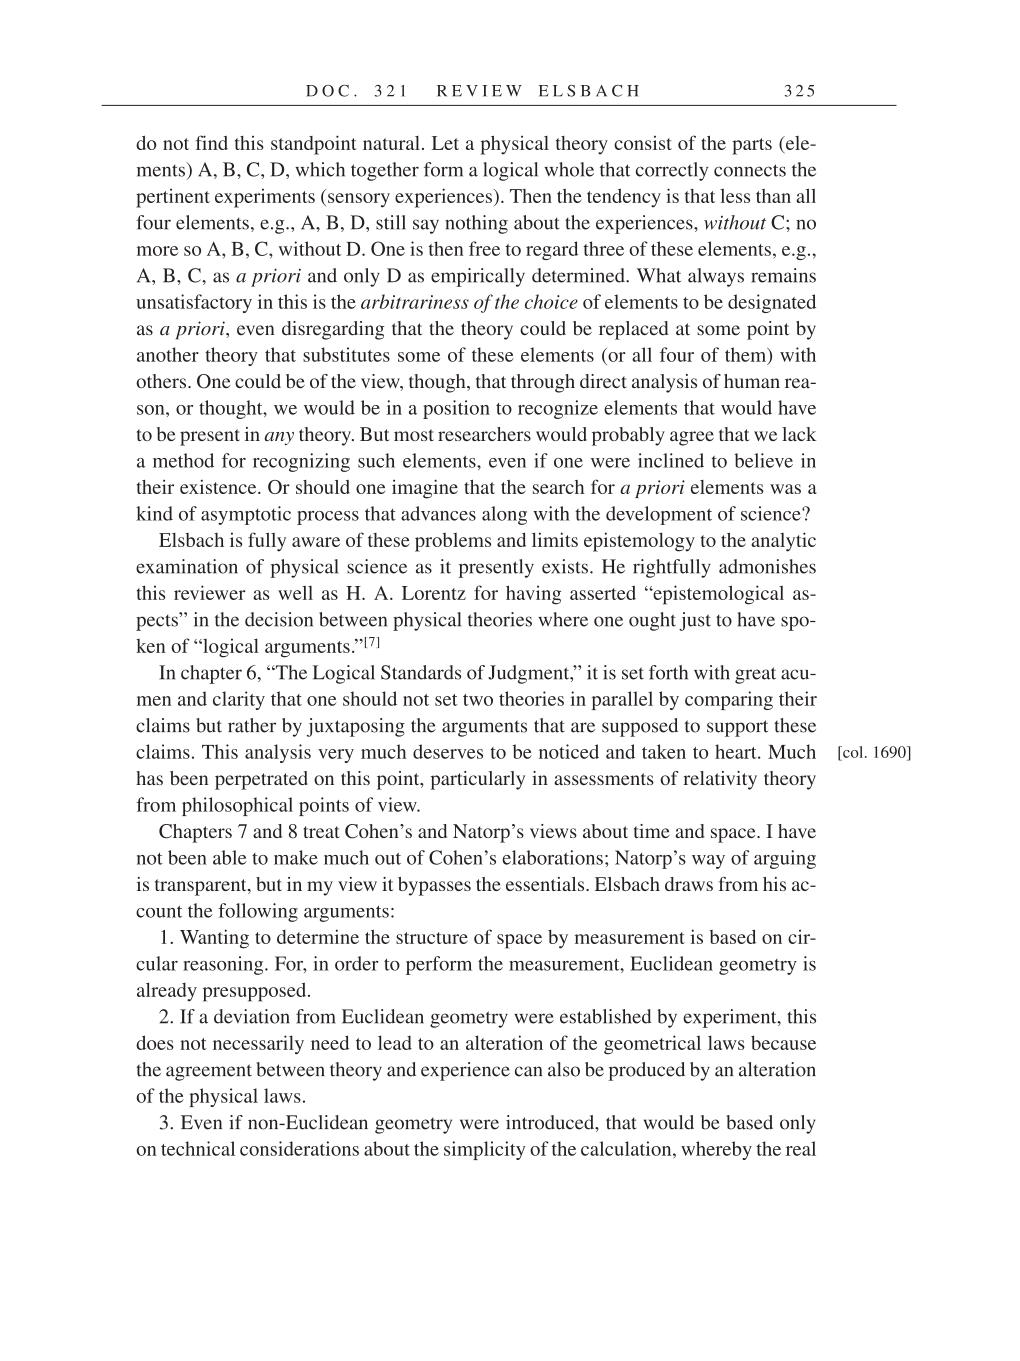 Volume 14: The Berlin Years: Writings & Correspondence, April 1923-May 1925 (English Translation Supplement) page 325